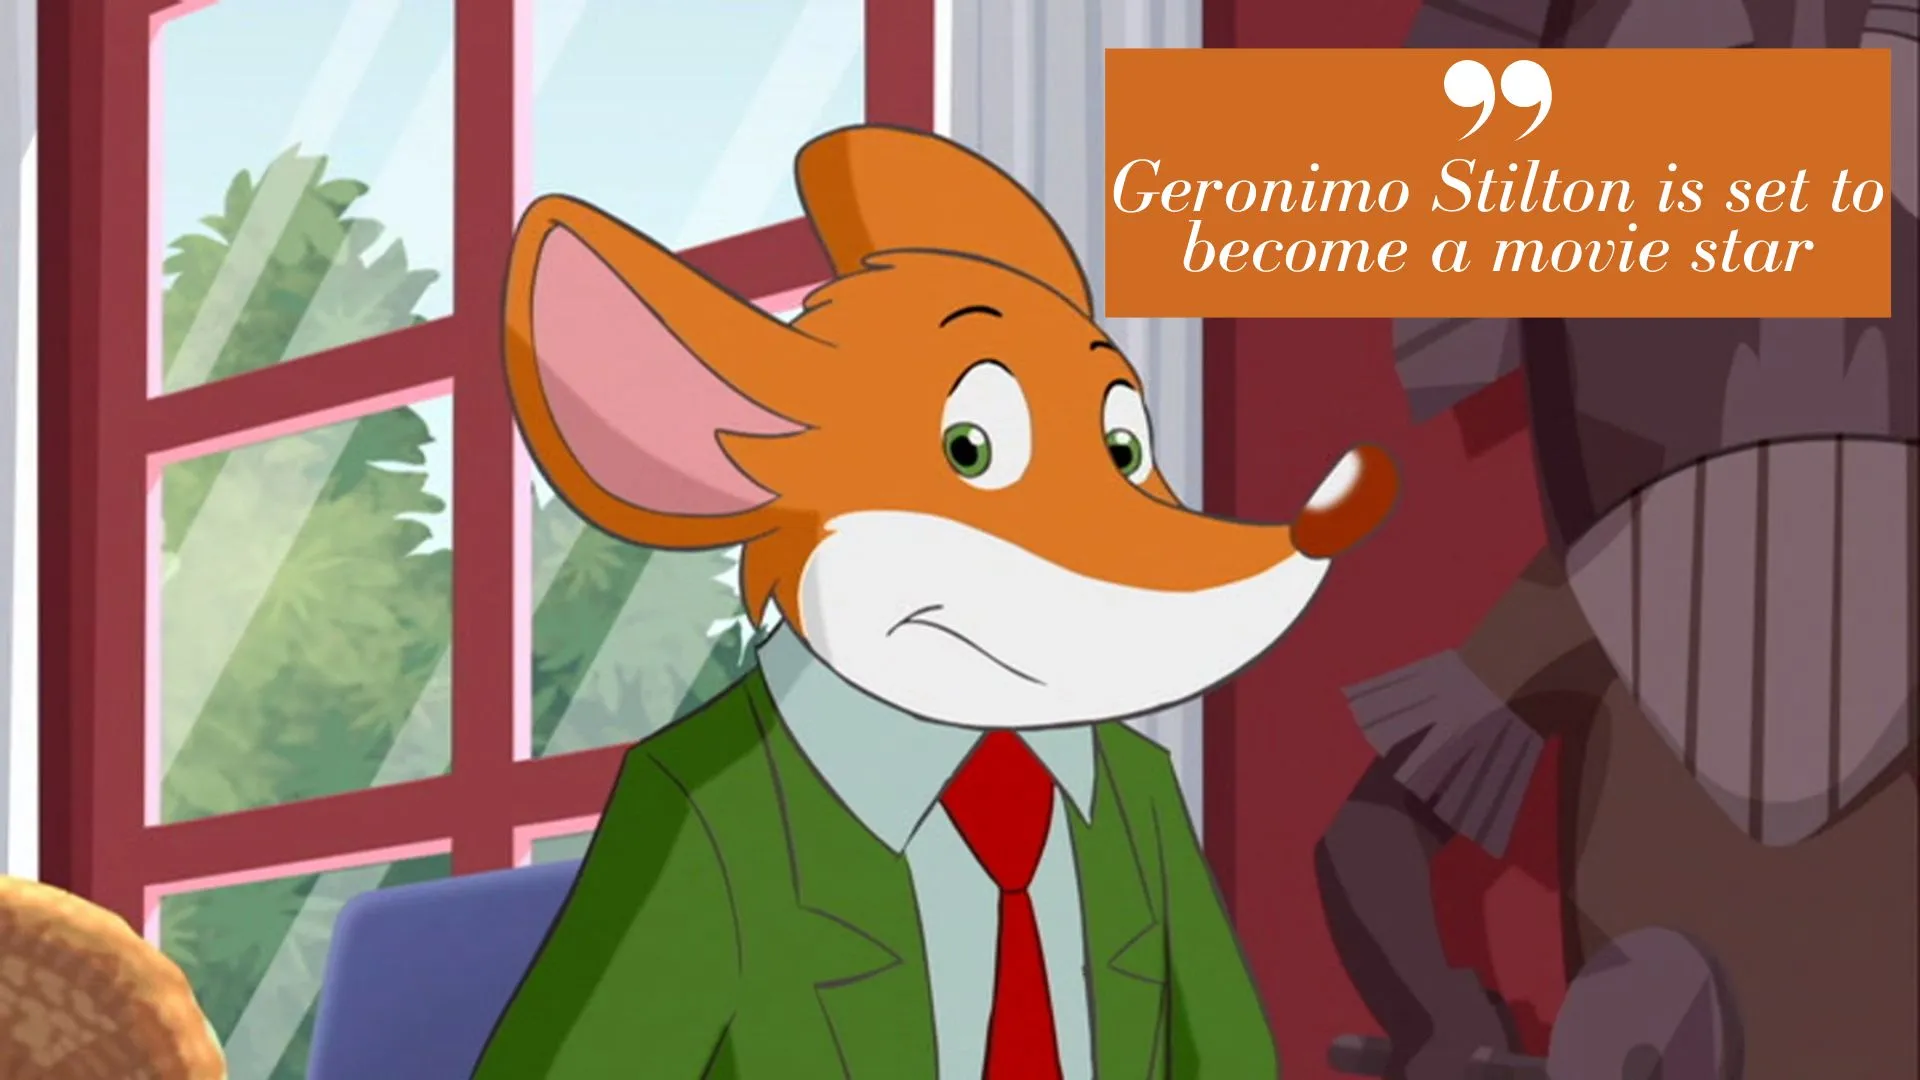 Geronimo Stilton is set to become a movie star (Image credit: superights)